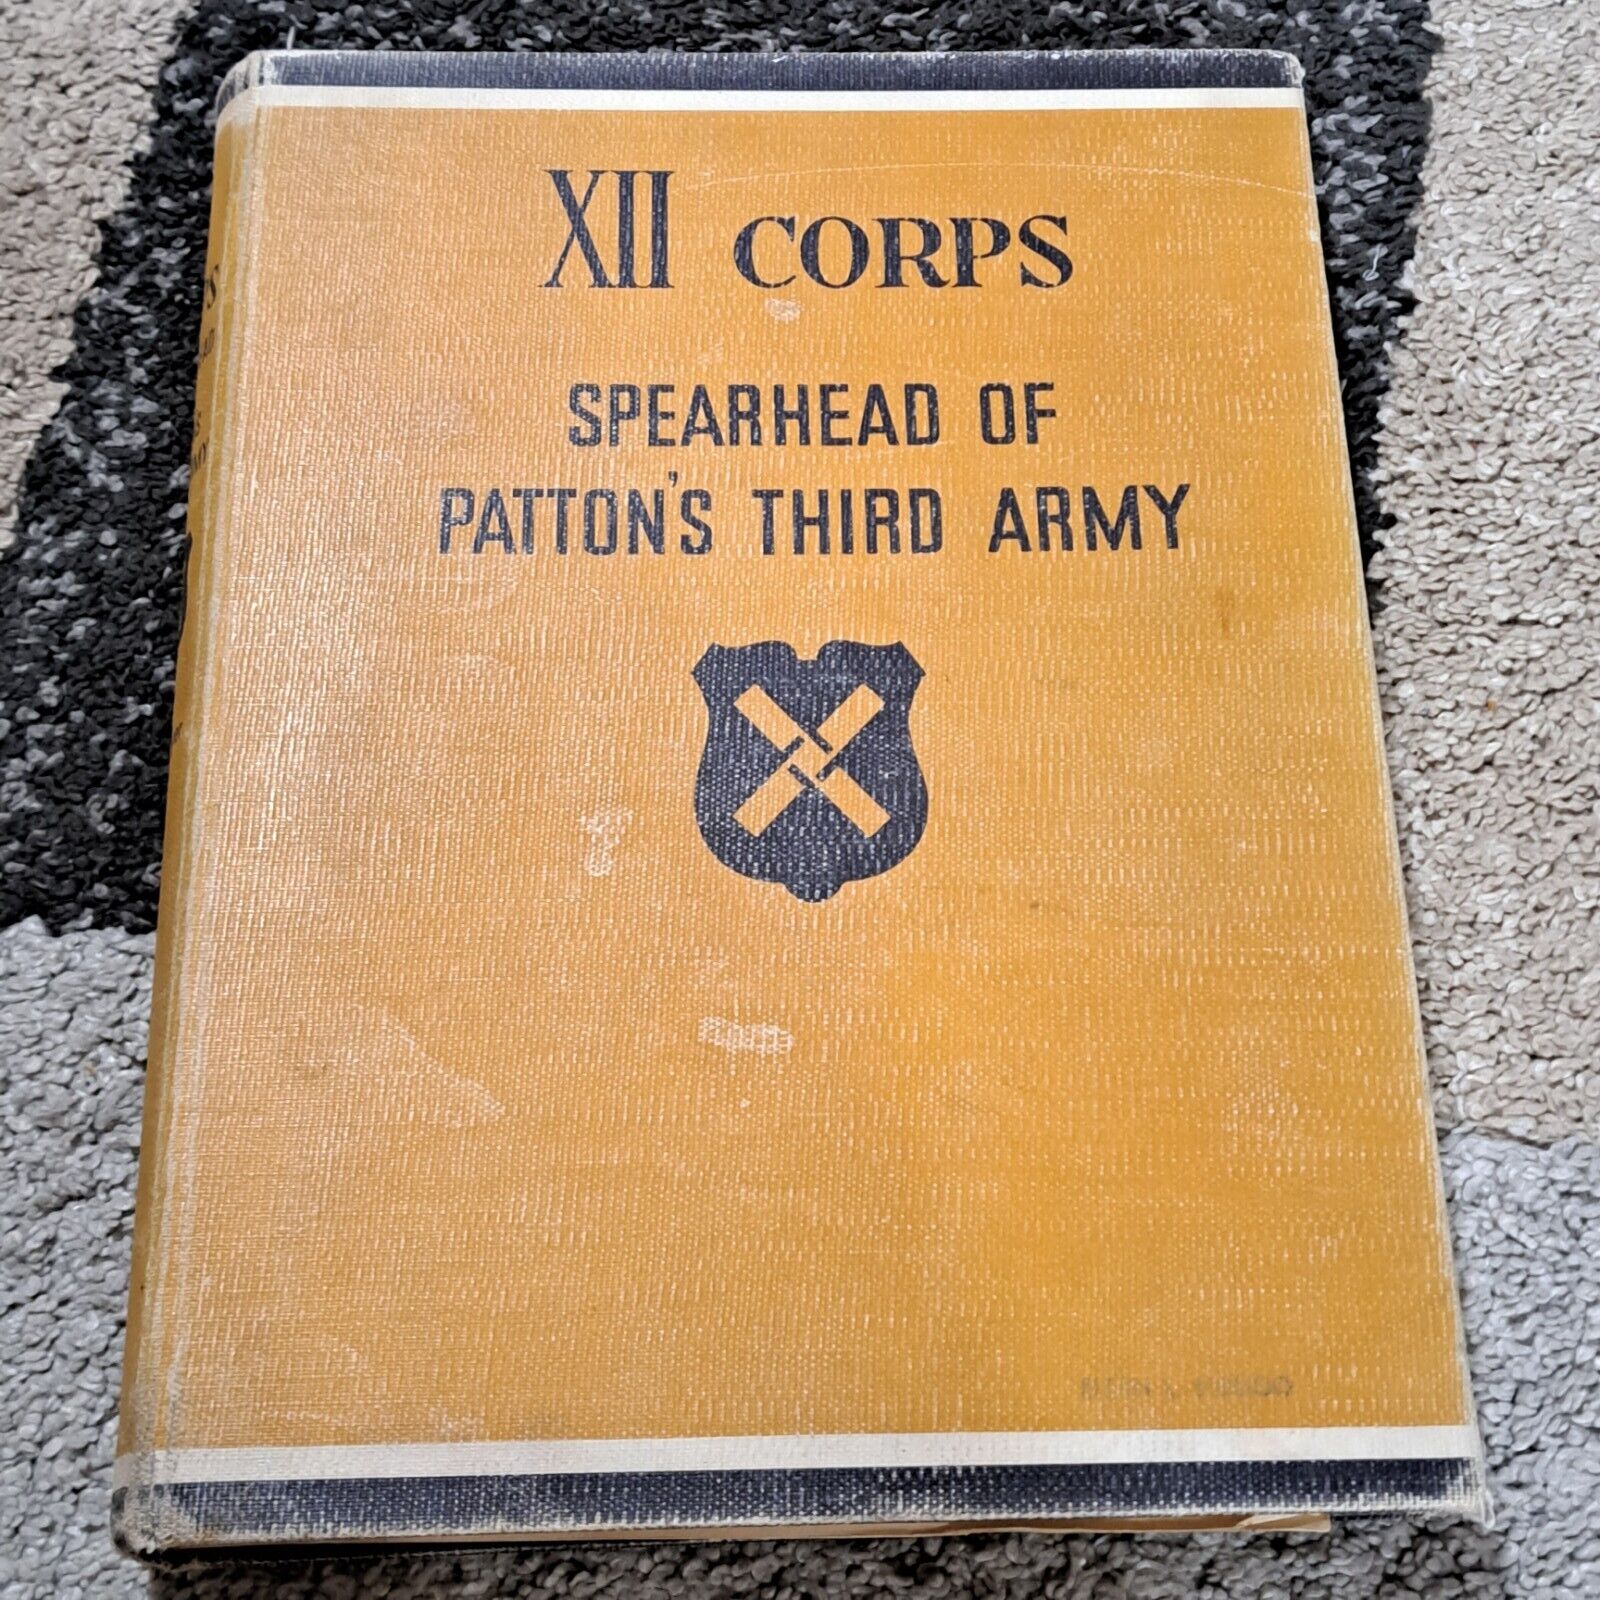 XII CORP SPEARHEAD OF PATTON'S THIRD ARMY BY DYER,GEORGE,1903-1978.